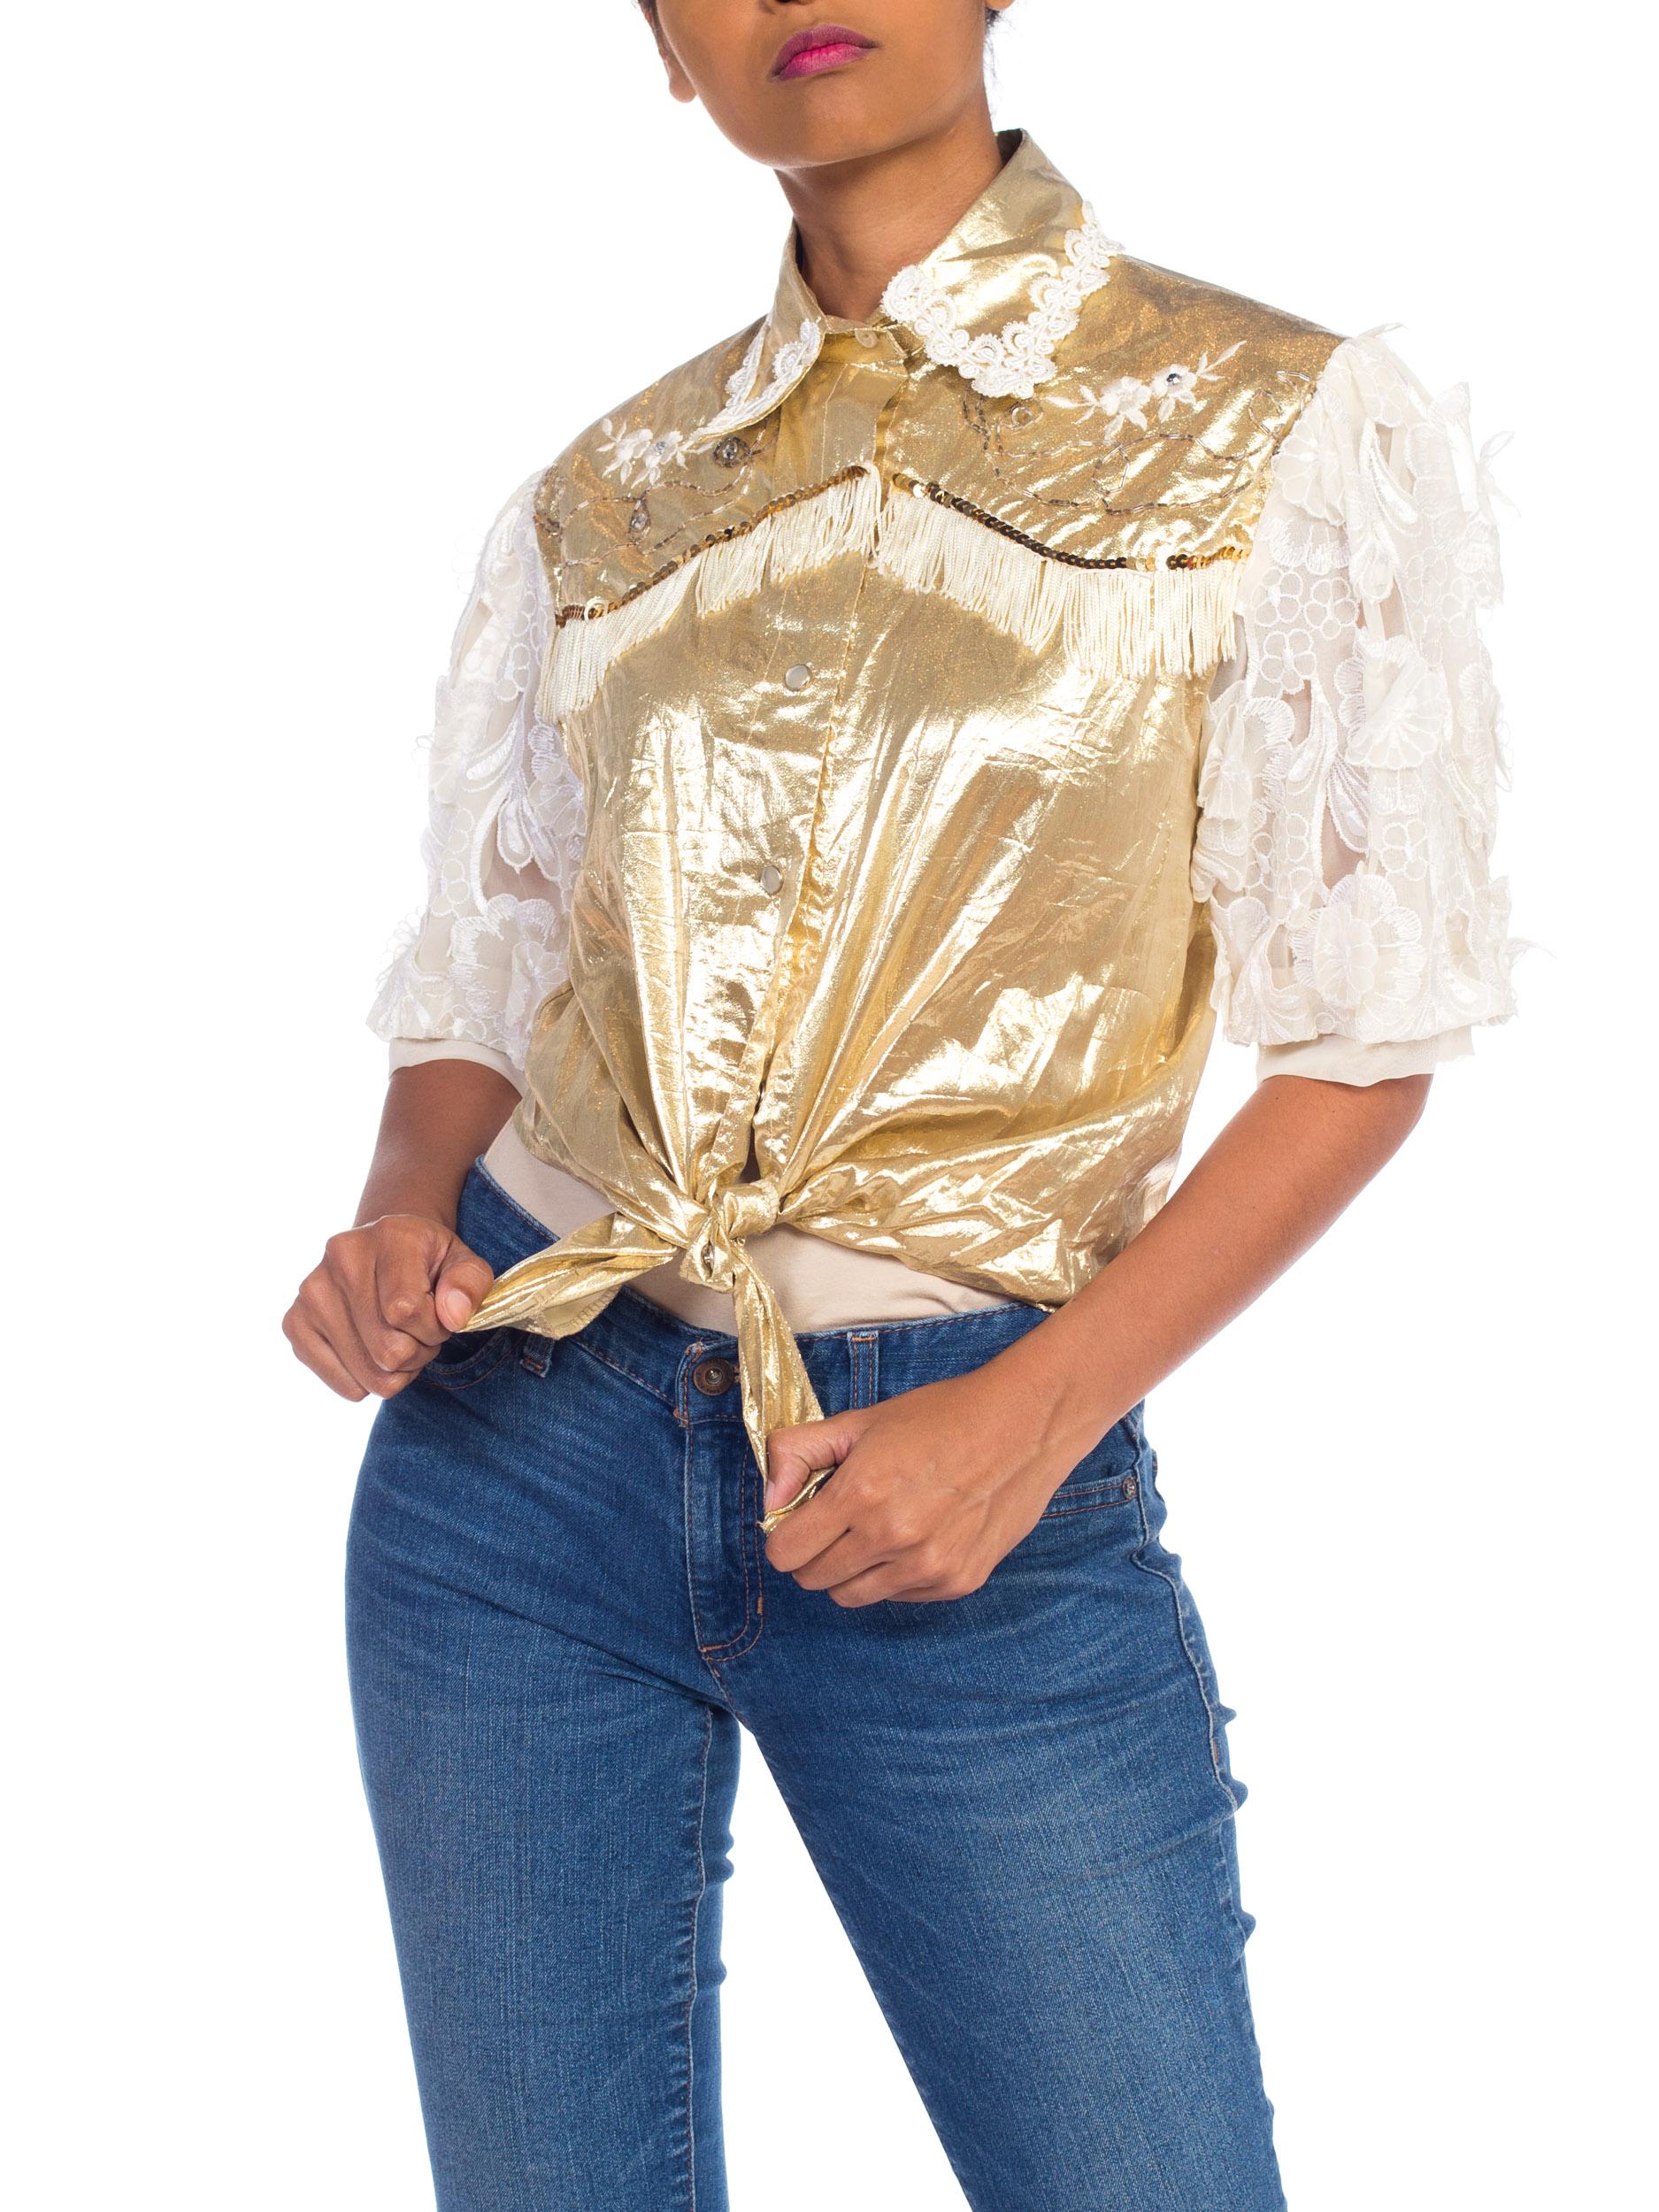 Gold Lamé & Lace Western Top with Fringe 4